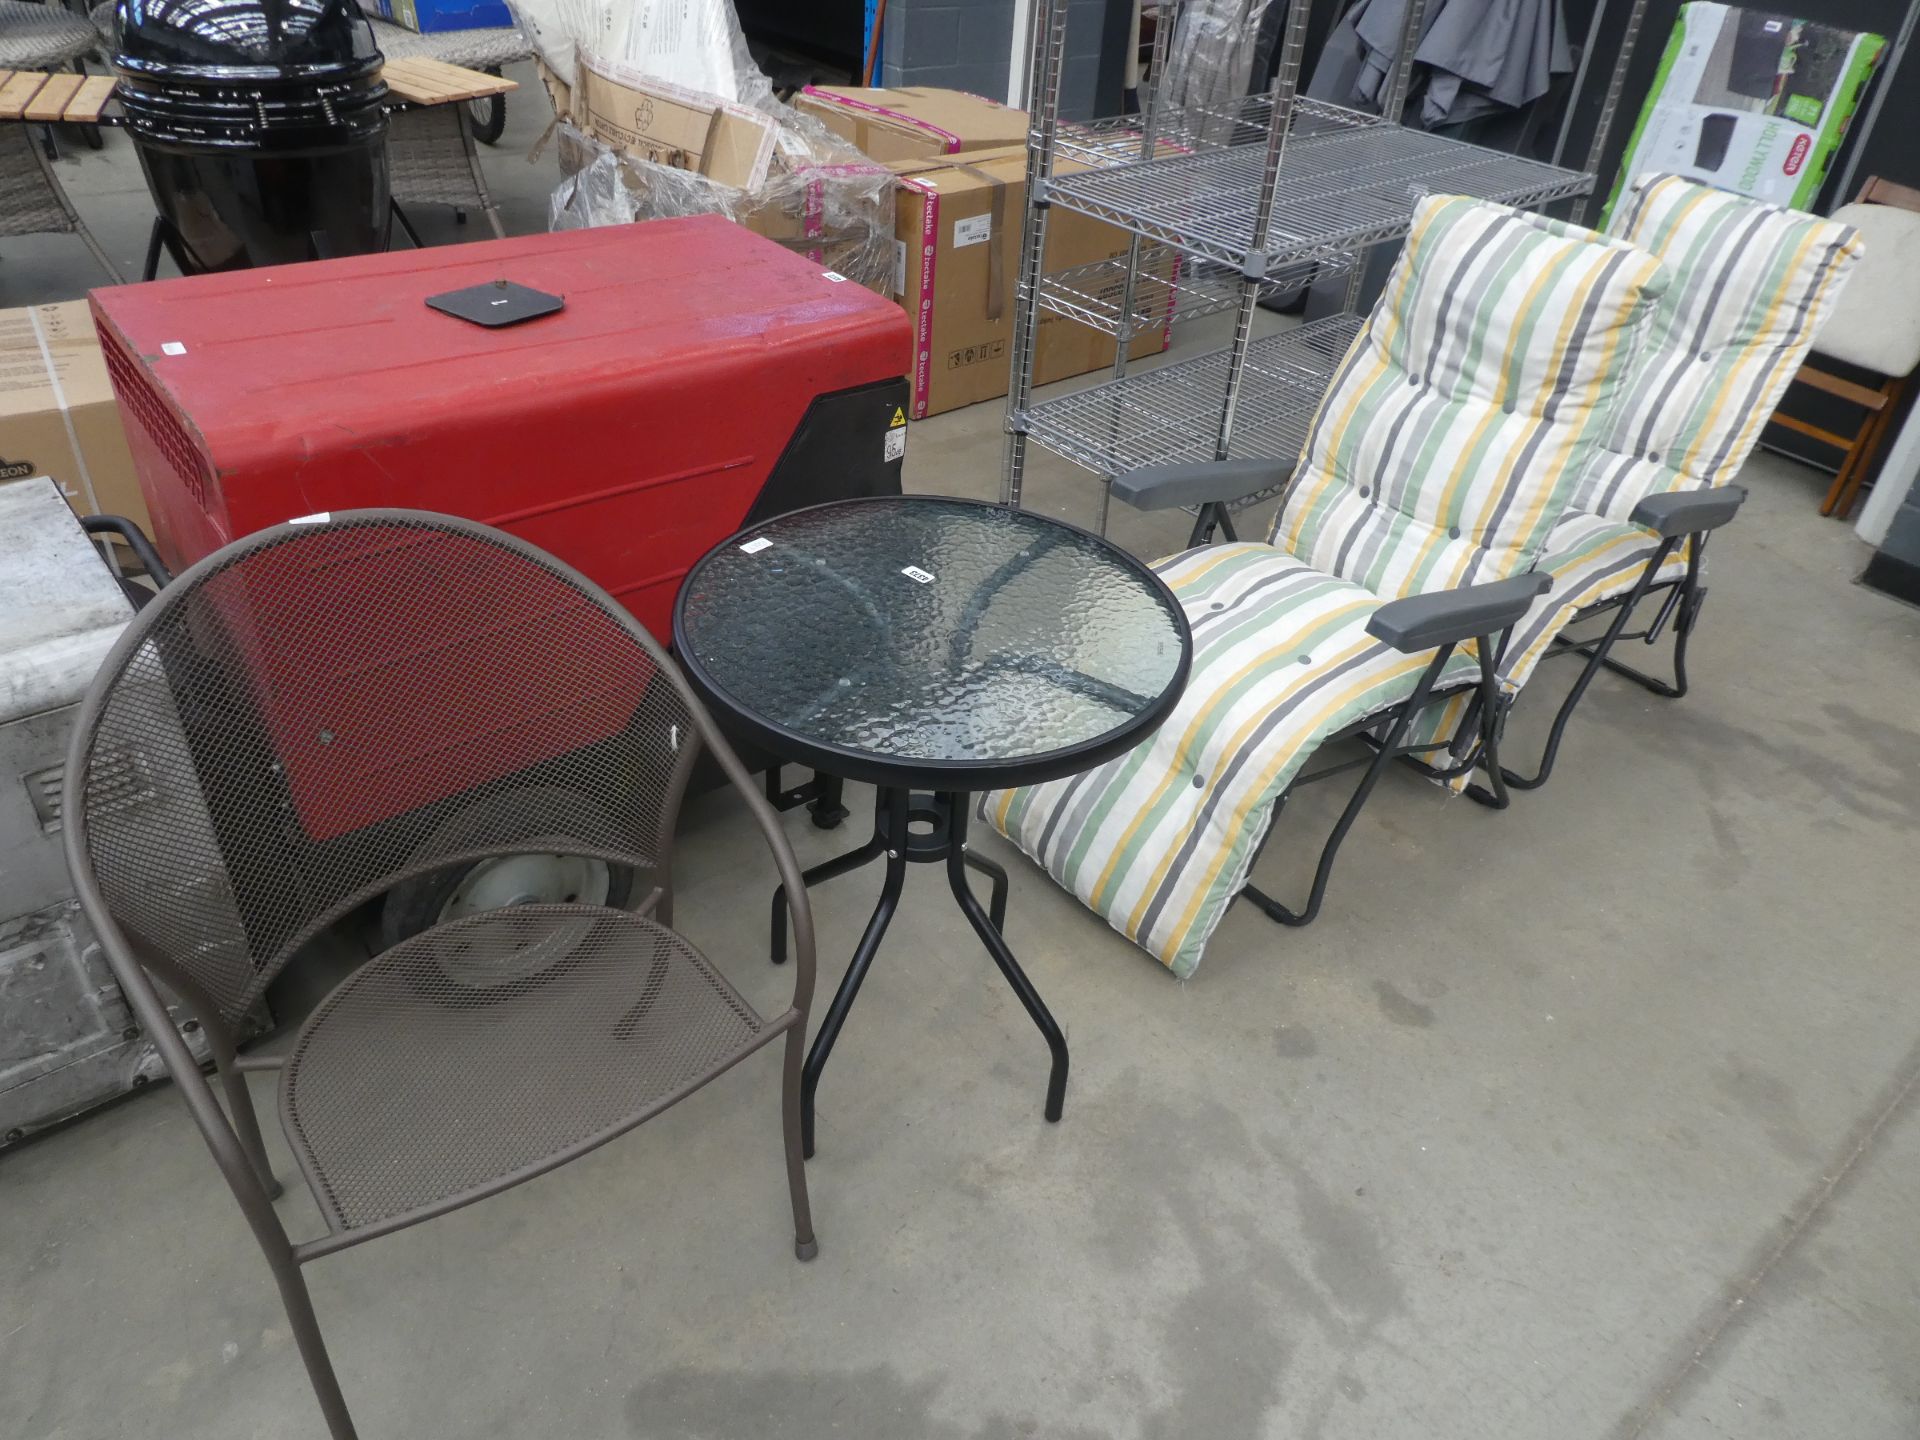 Small black glass top table and brown mesh chair, with 2 grey garden loungers